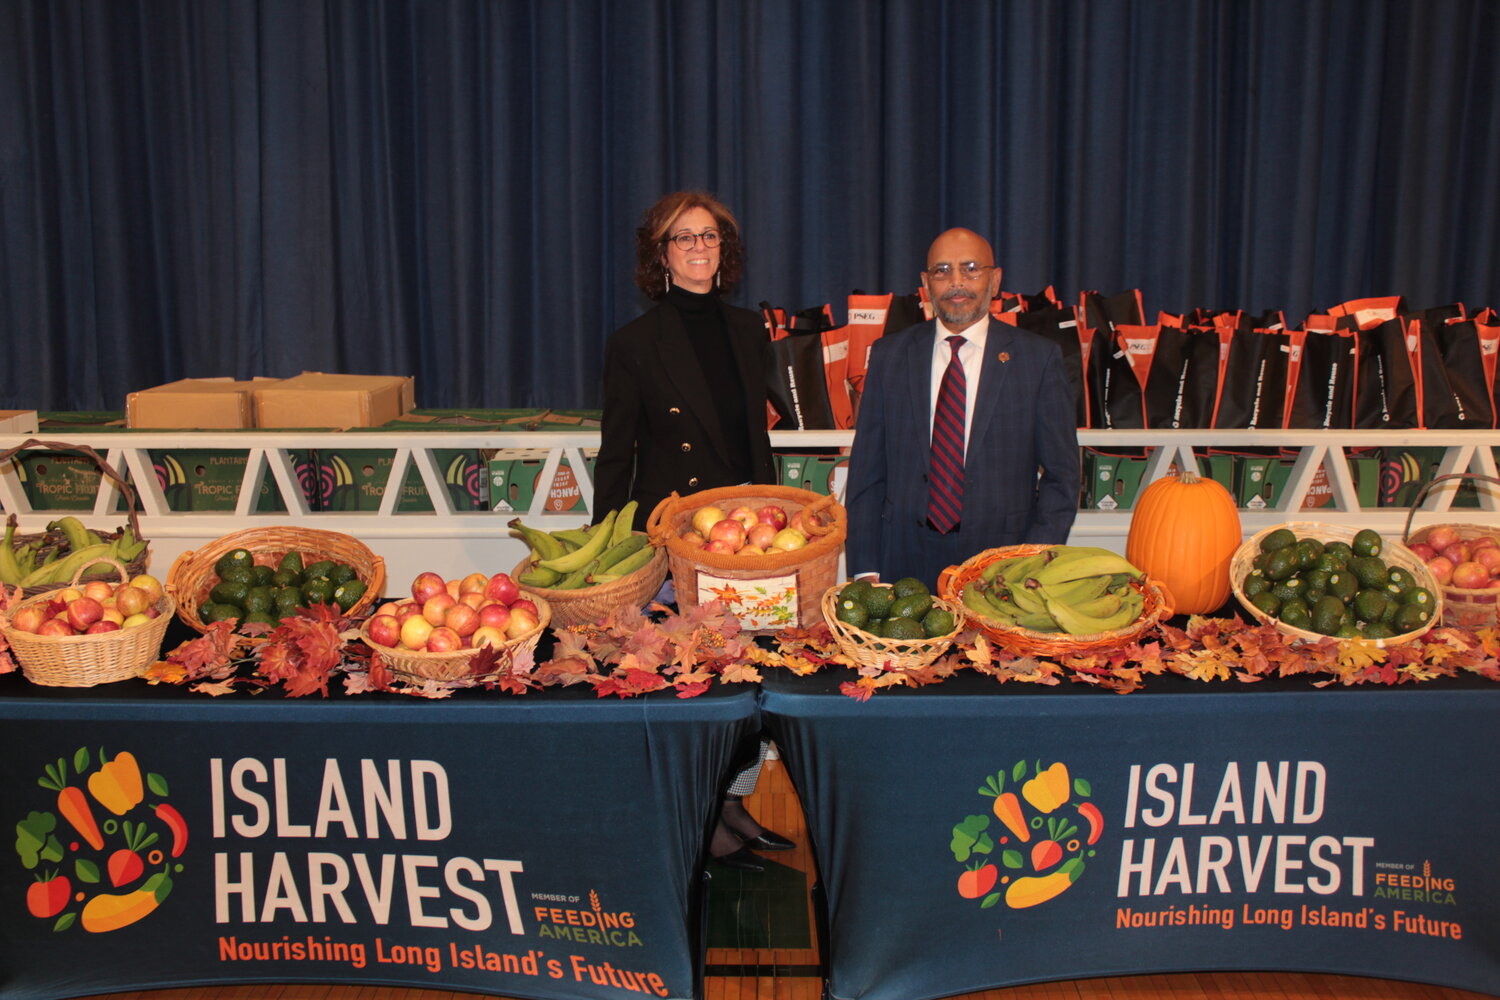 The collaborative efforts between Superintendent Kishore Kuncham of Freeport Public Schools and Randi Shubin Dresner, President and CEO of Island Harvest Food Bank are aimed at addressing childhood hunger and food insecurity.